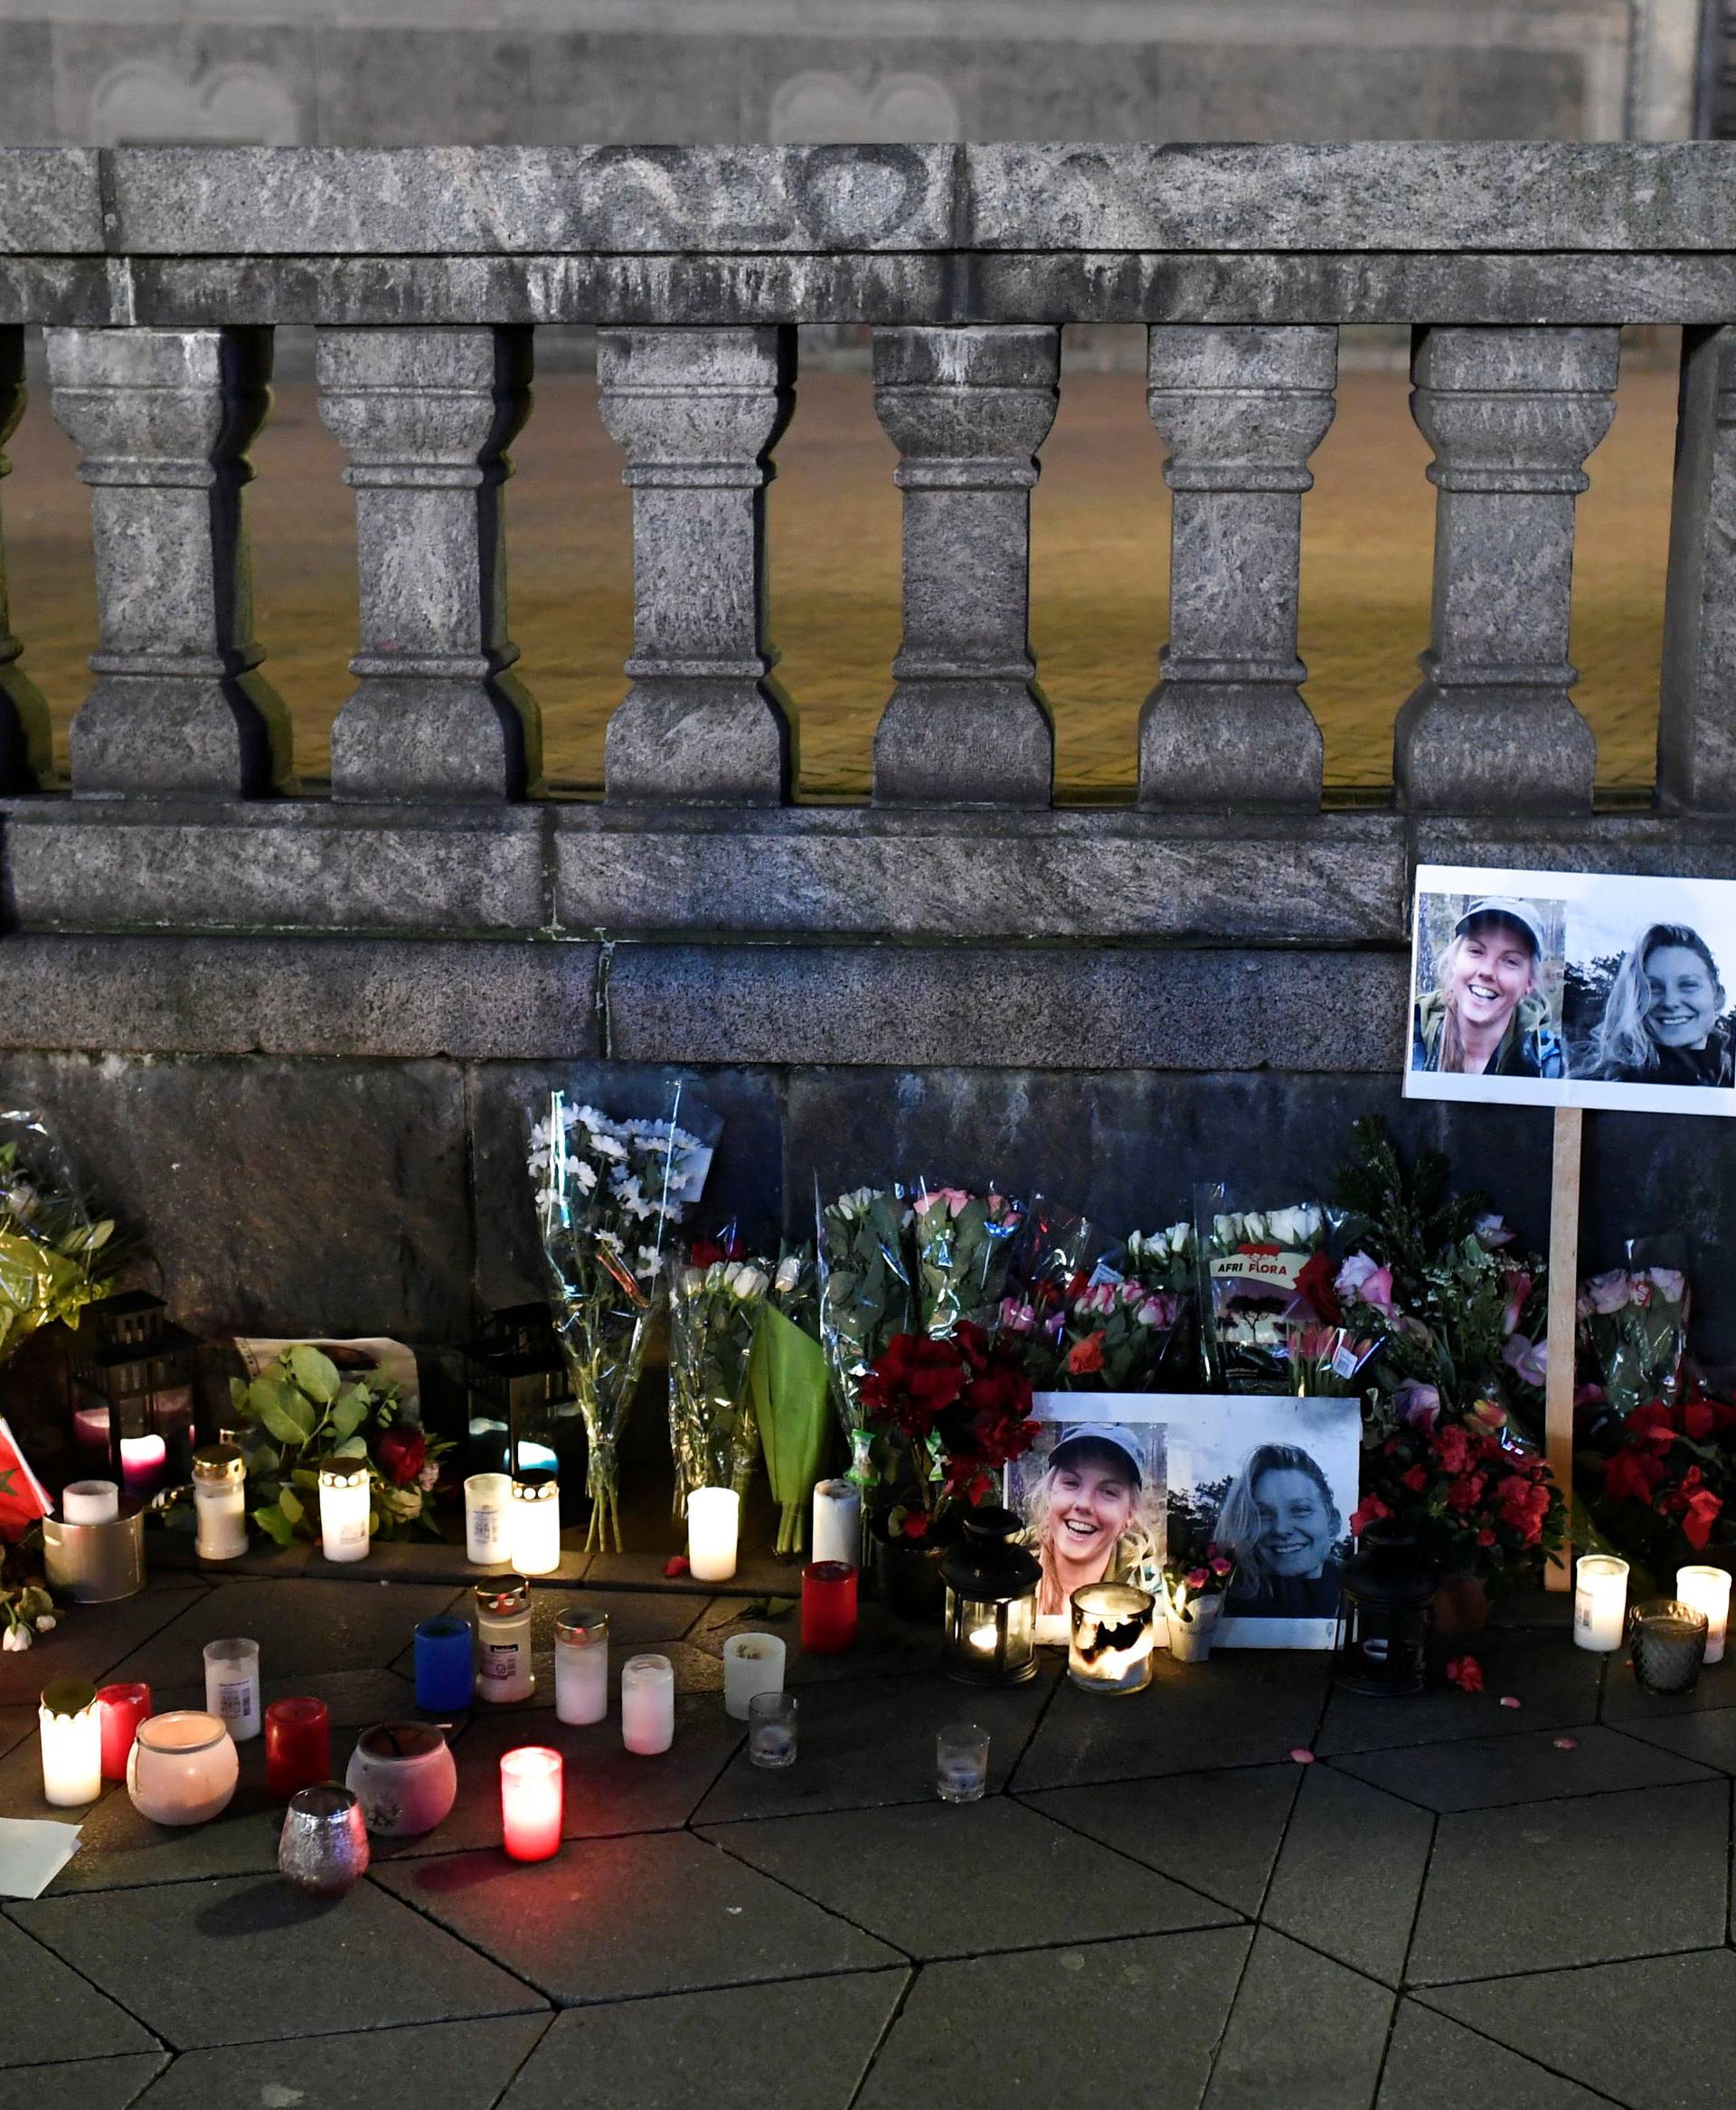 Flowers and candles in memory of Louisa Vesterager Jespersen and Maren Ueland are seen at the Town Hall Square in Copenhagen